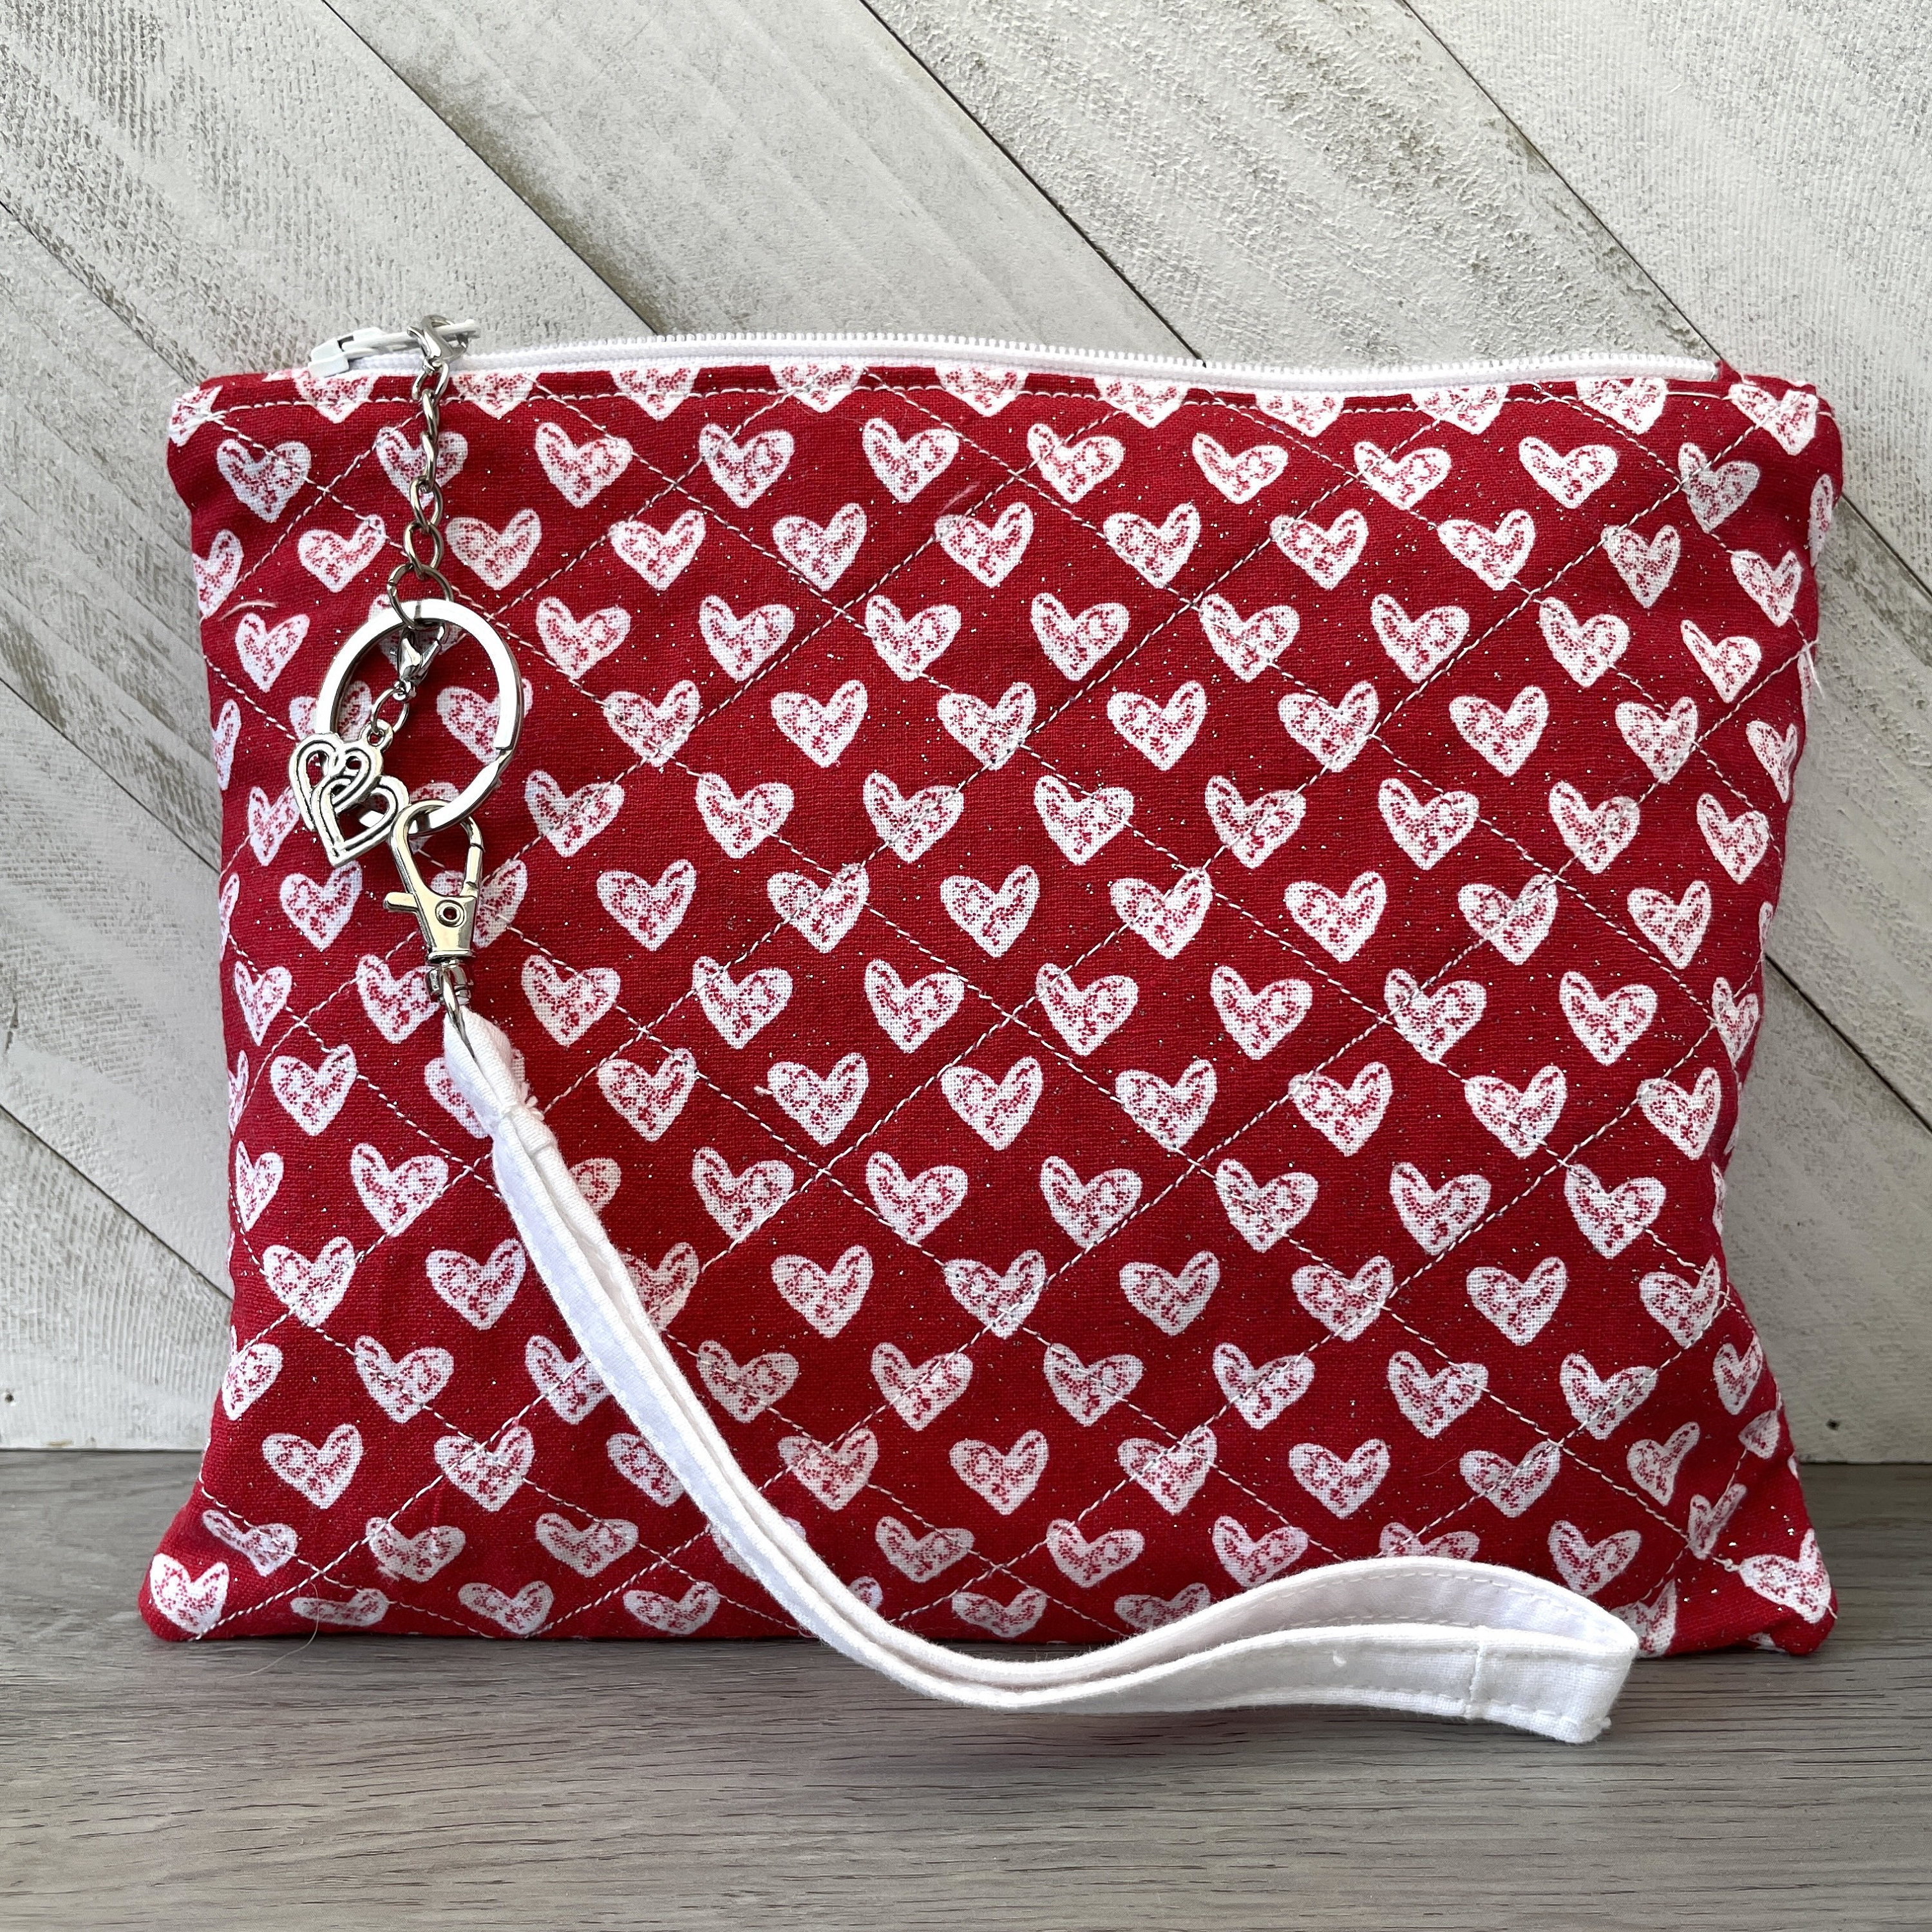 Mini Letter Graphic Quilted Detail Heart Shaped Novelty Bag